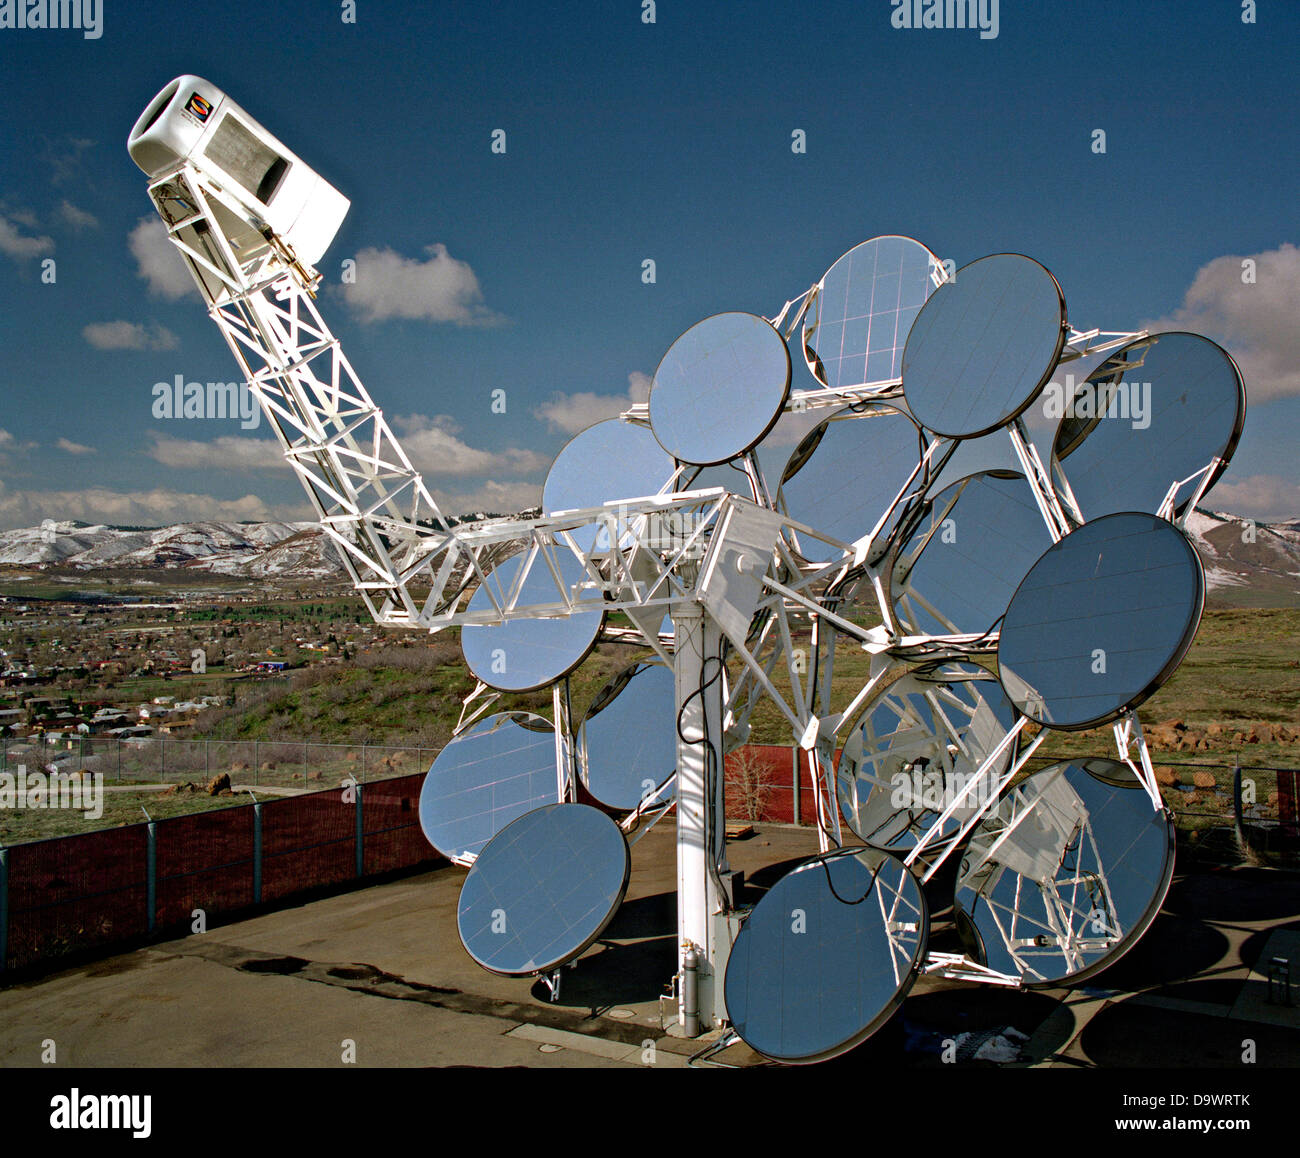 Stirling Solar power systems solar dish engine April 21, 1998 in Golden, Colorado. The dish produces electricity uses mirrors to focus sunlight onto a thermal receiver. The heat is used to run a Stirling heat engine, which drives an electric generator. Stock Photo